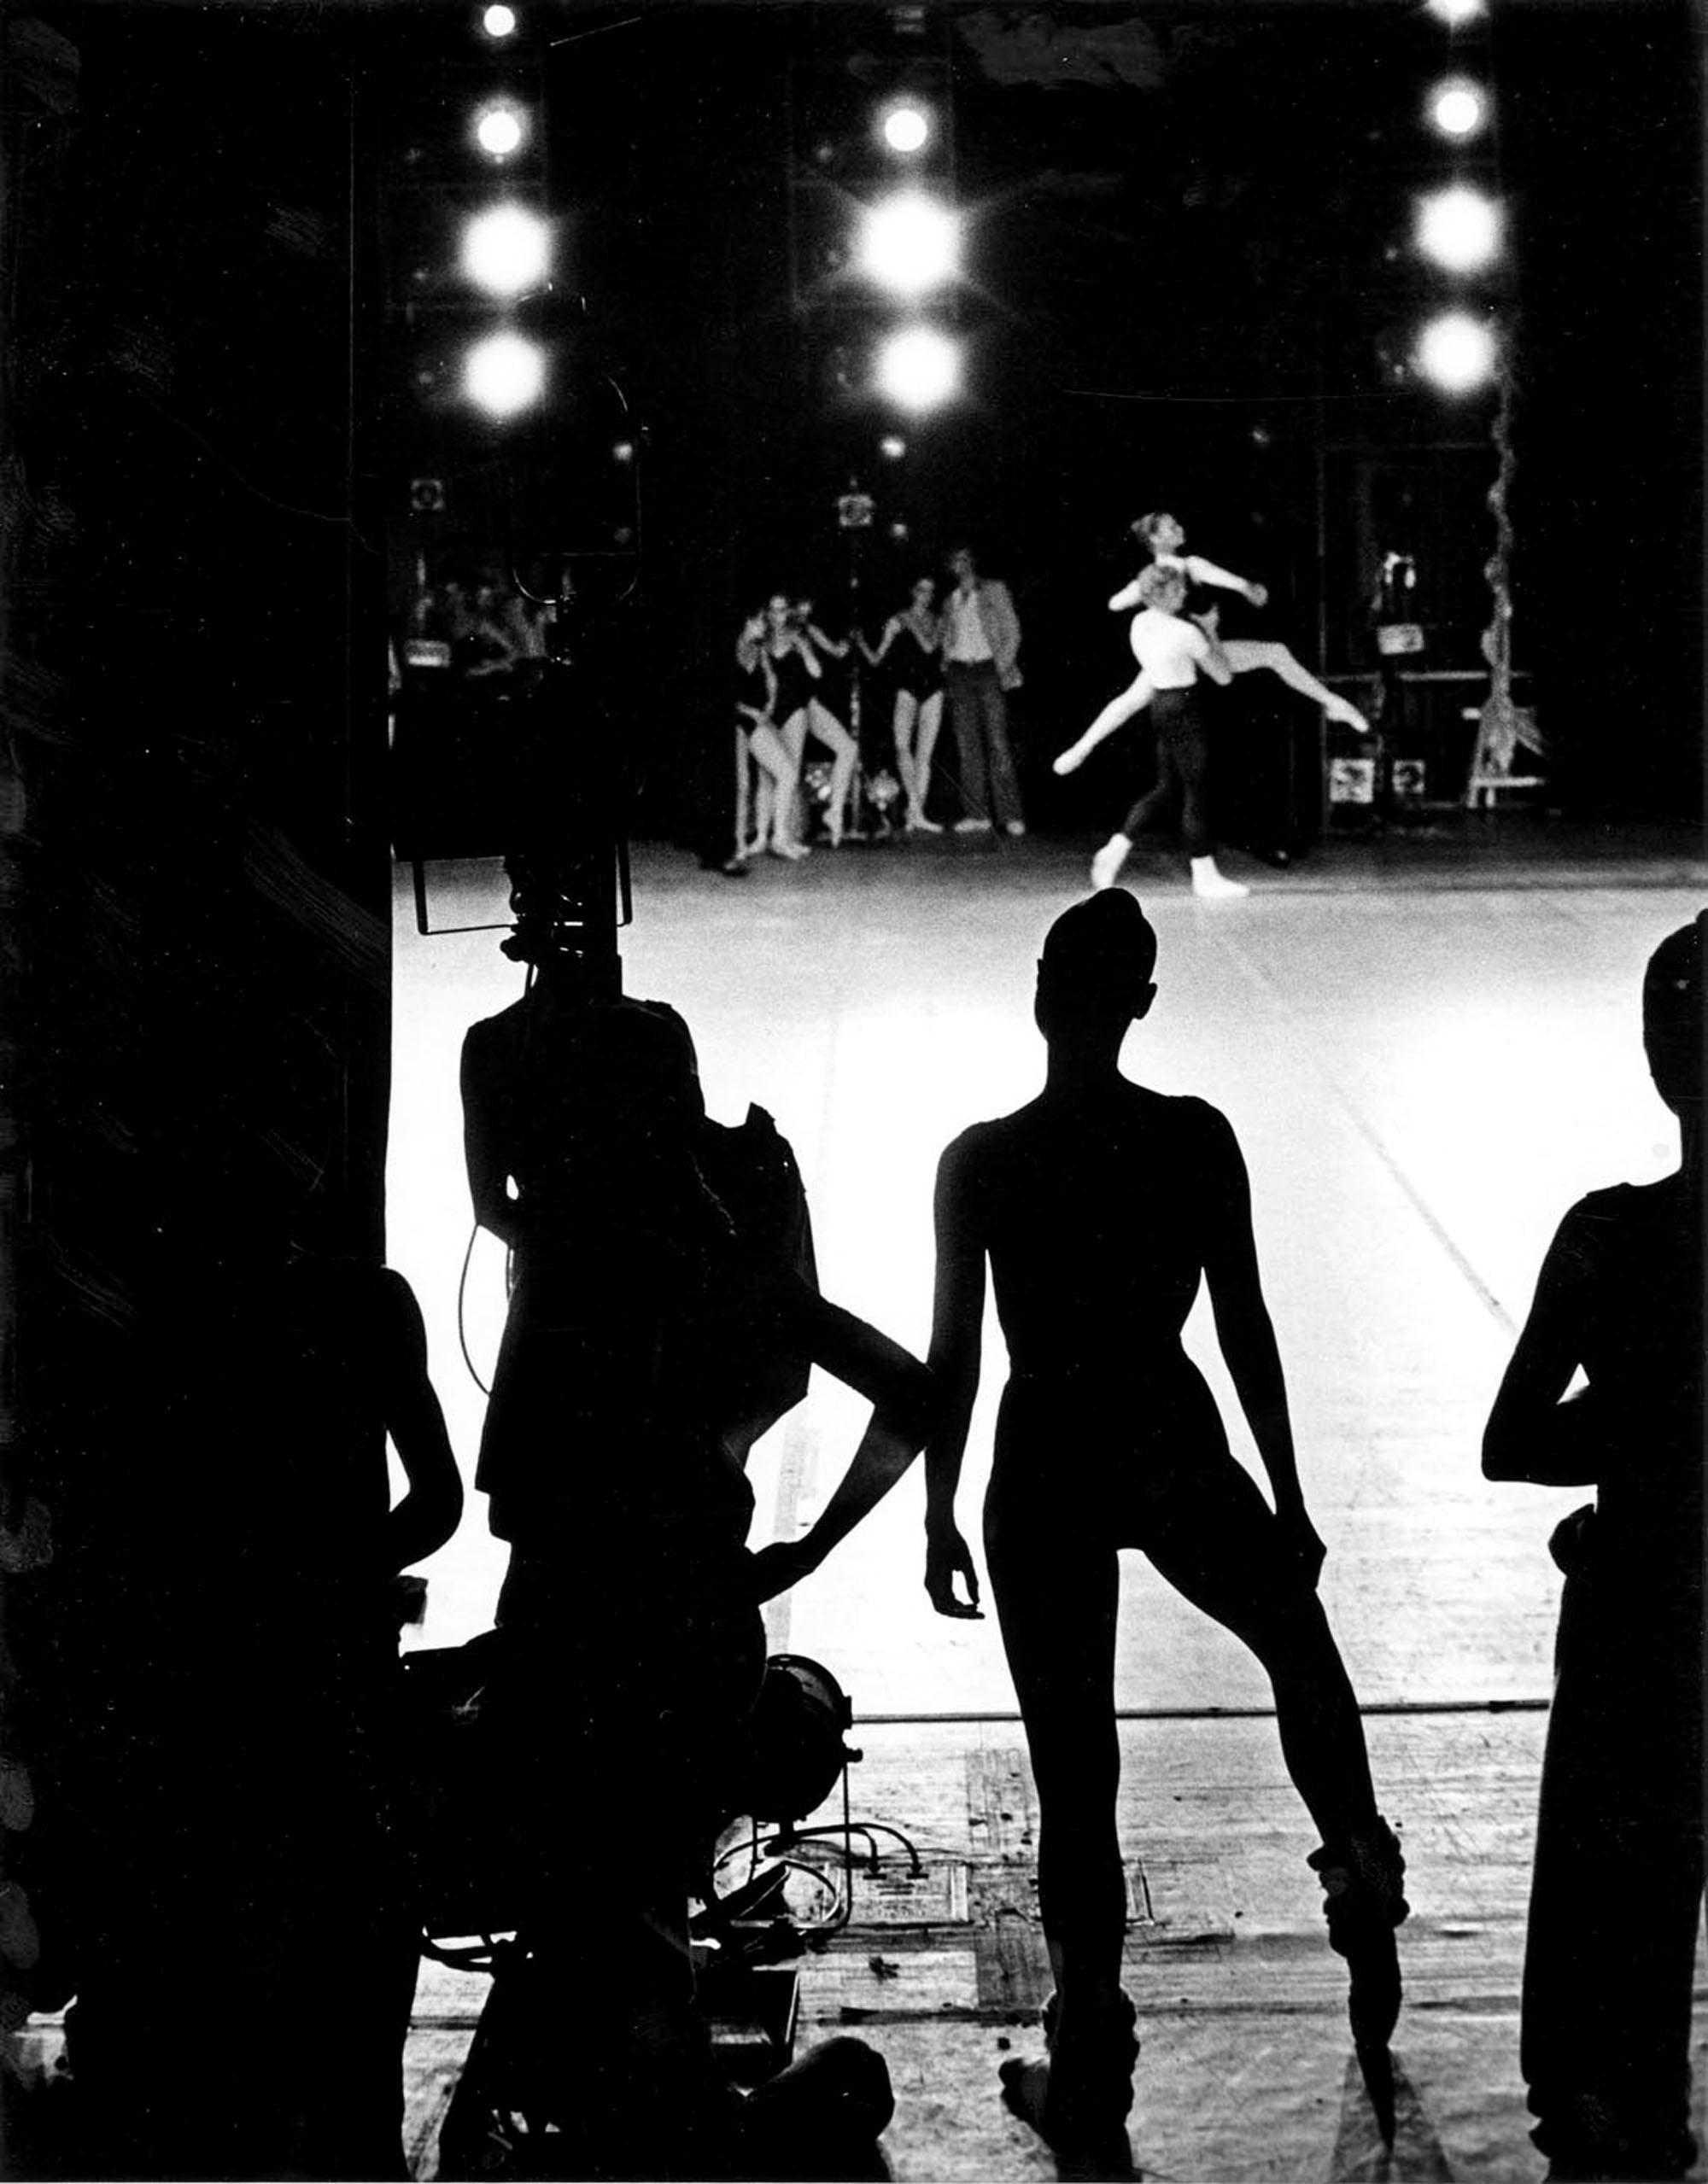 Jack Mitchell Black and White Photograph - New York City Ballet Performing, Backstage Silhouette 